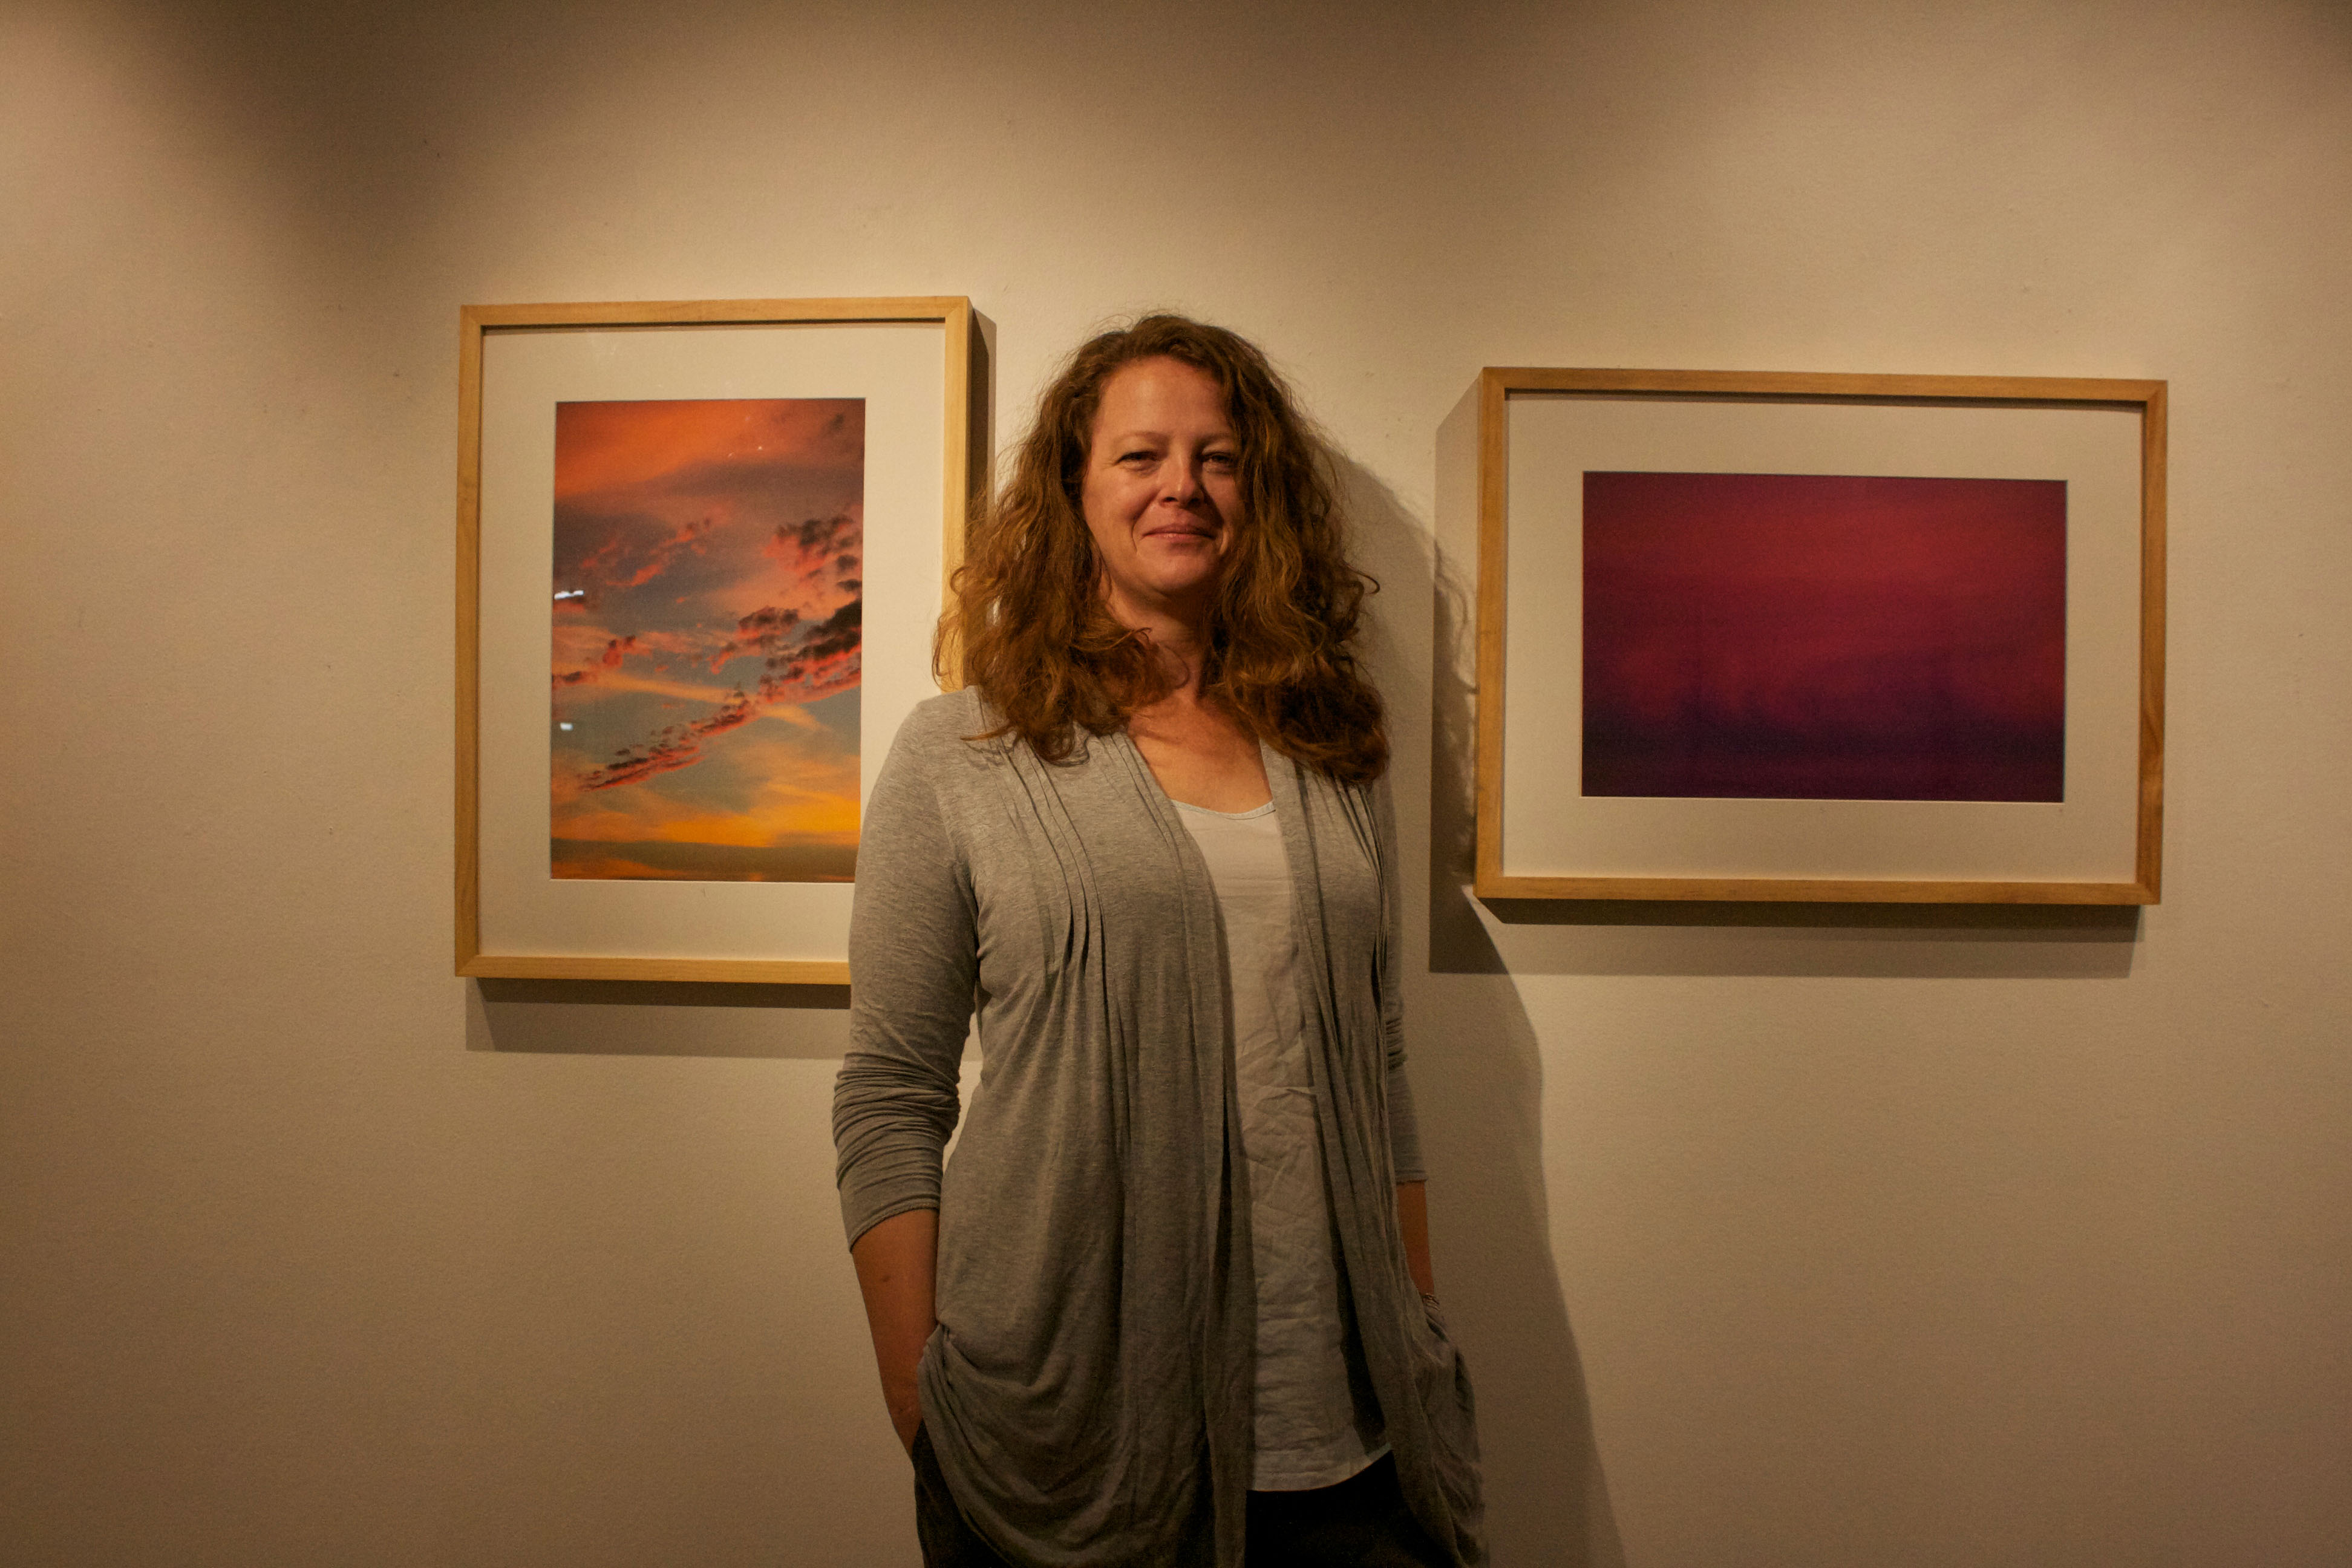 City College photography student, Adrienne Johnson, in front of her images on display from her series “Agathokakological,” at Gallery Obscura on Oct. 15, 2015. (Photo by Cassie Ordonio/The Guardsman)